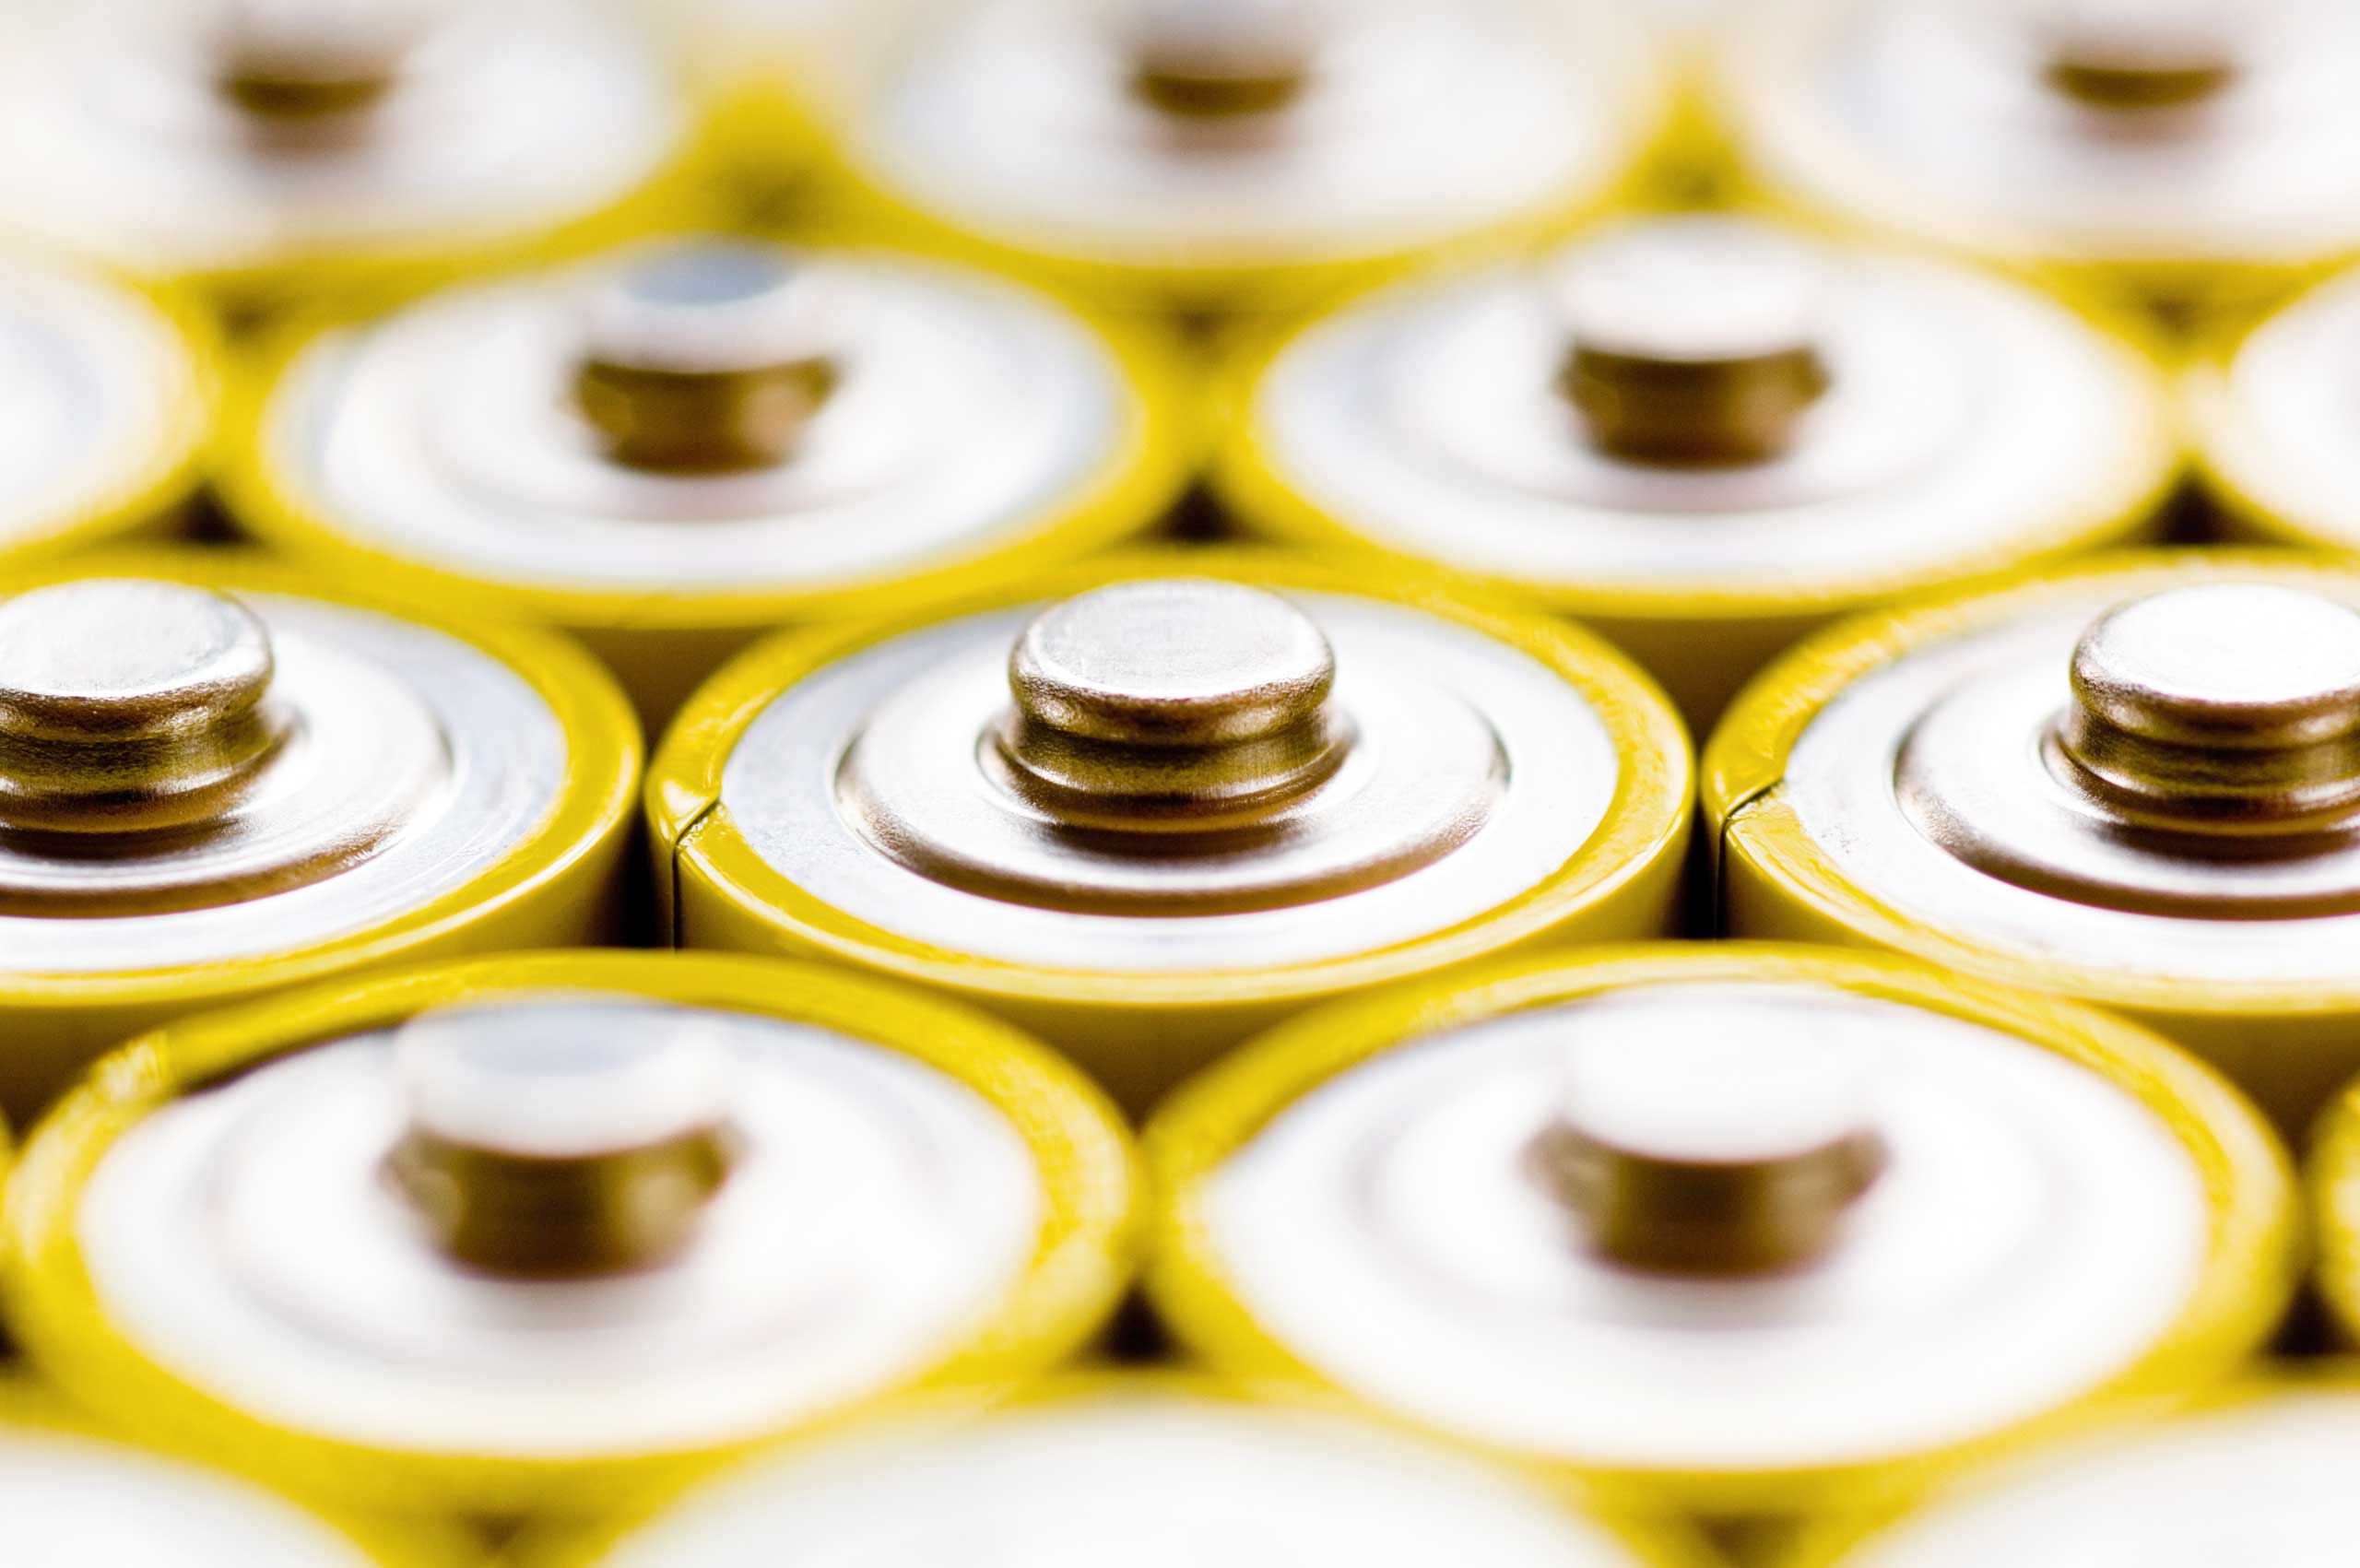 Tops of batteries, close-up